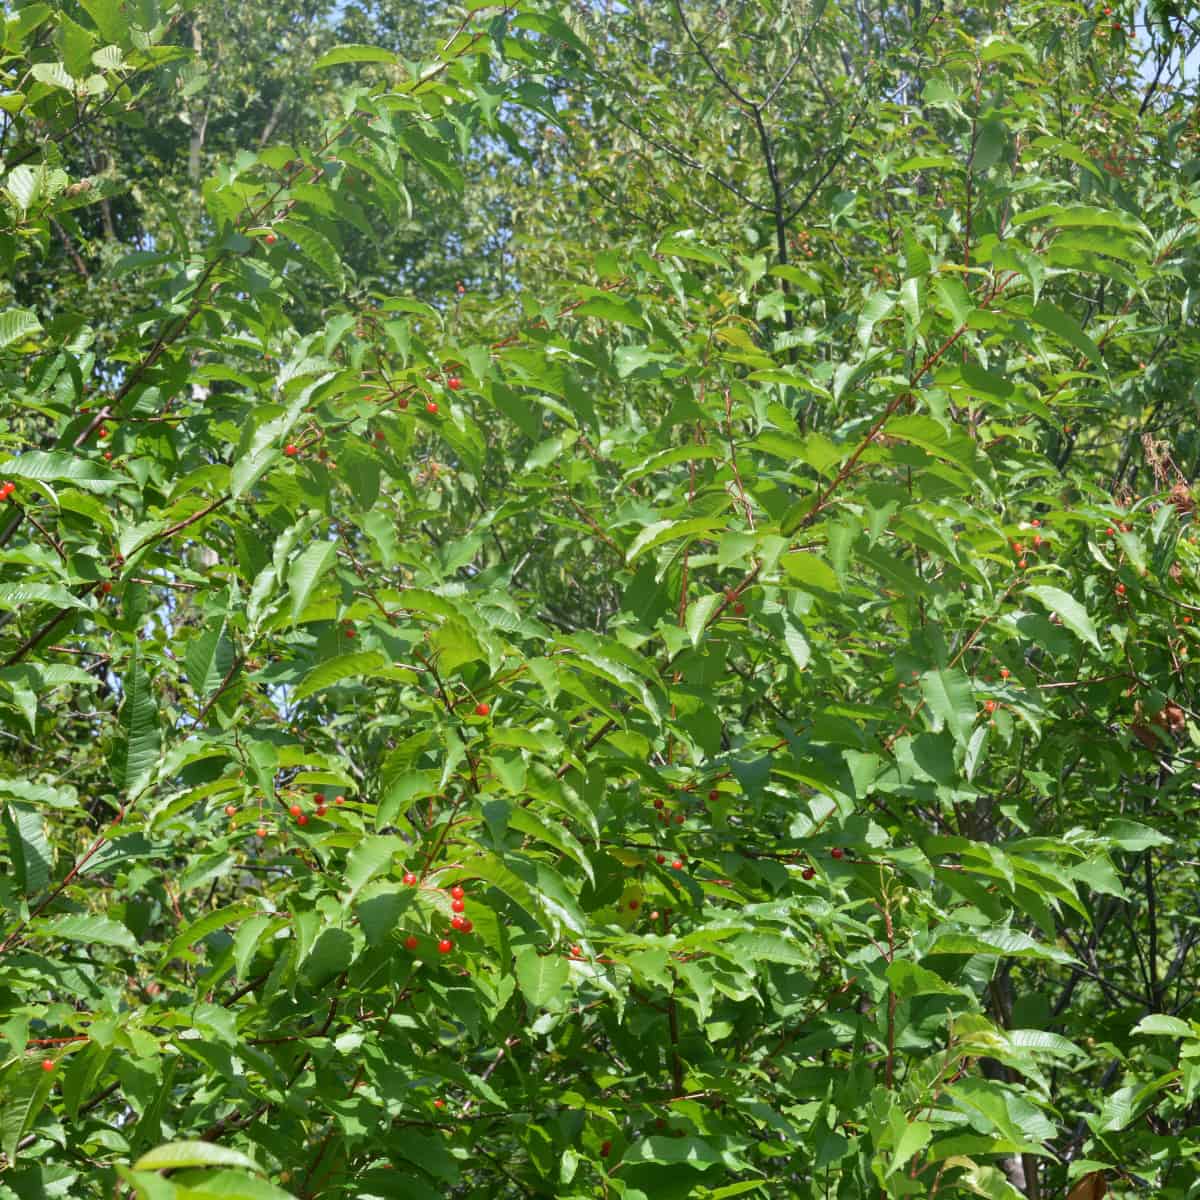 A cherry tree, showing leaves and fruit.